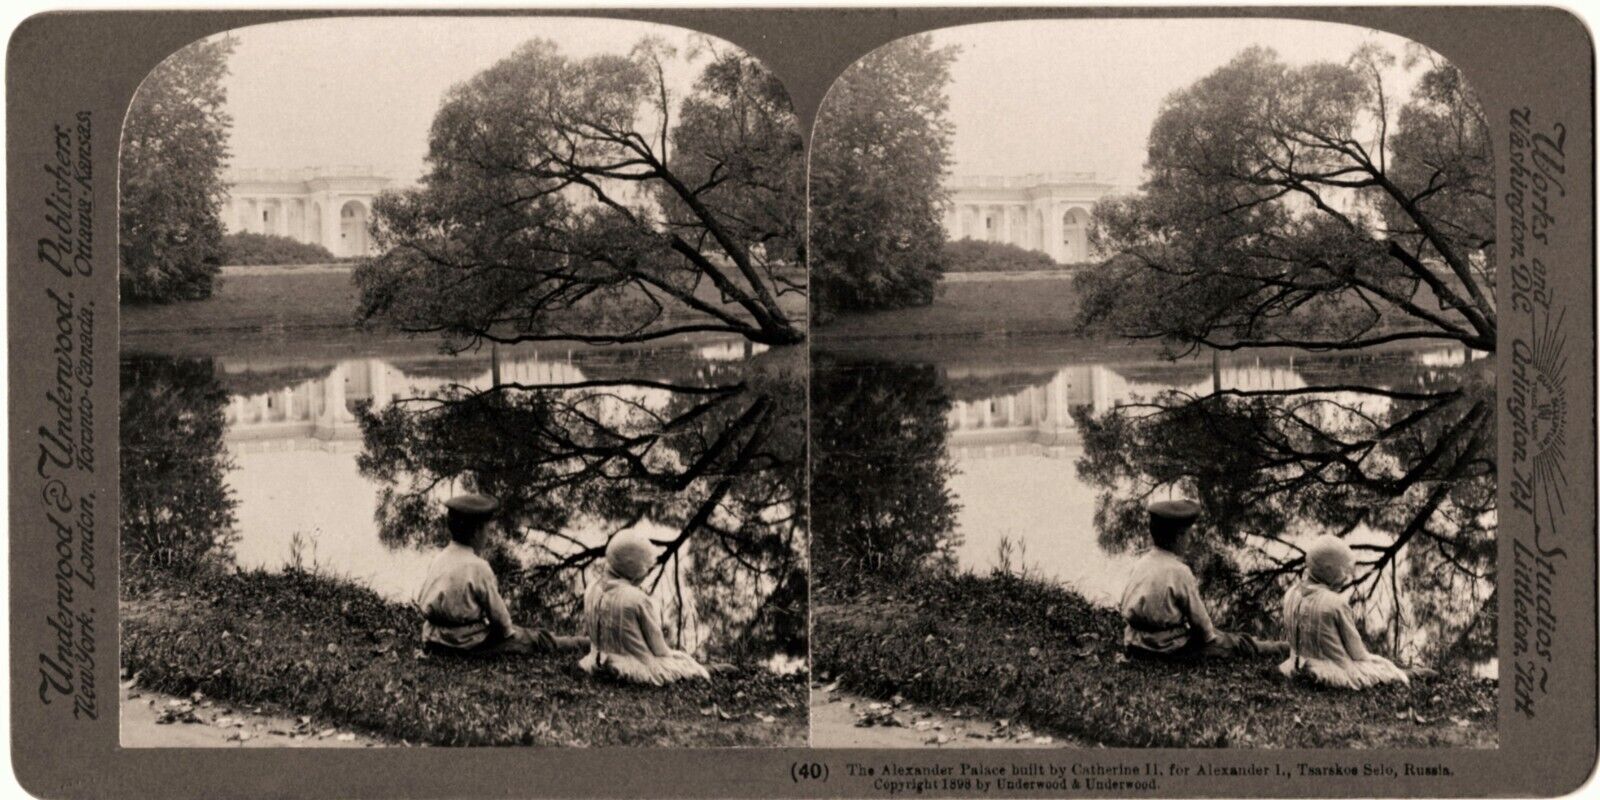 Rare STEREOVIEW, The Alexander Palace Built By Catherine II, Russia